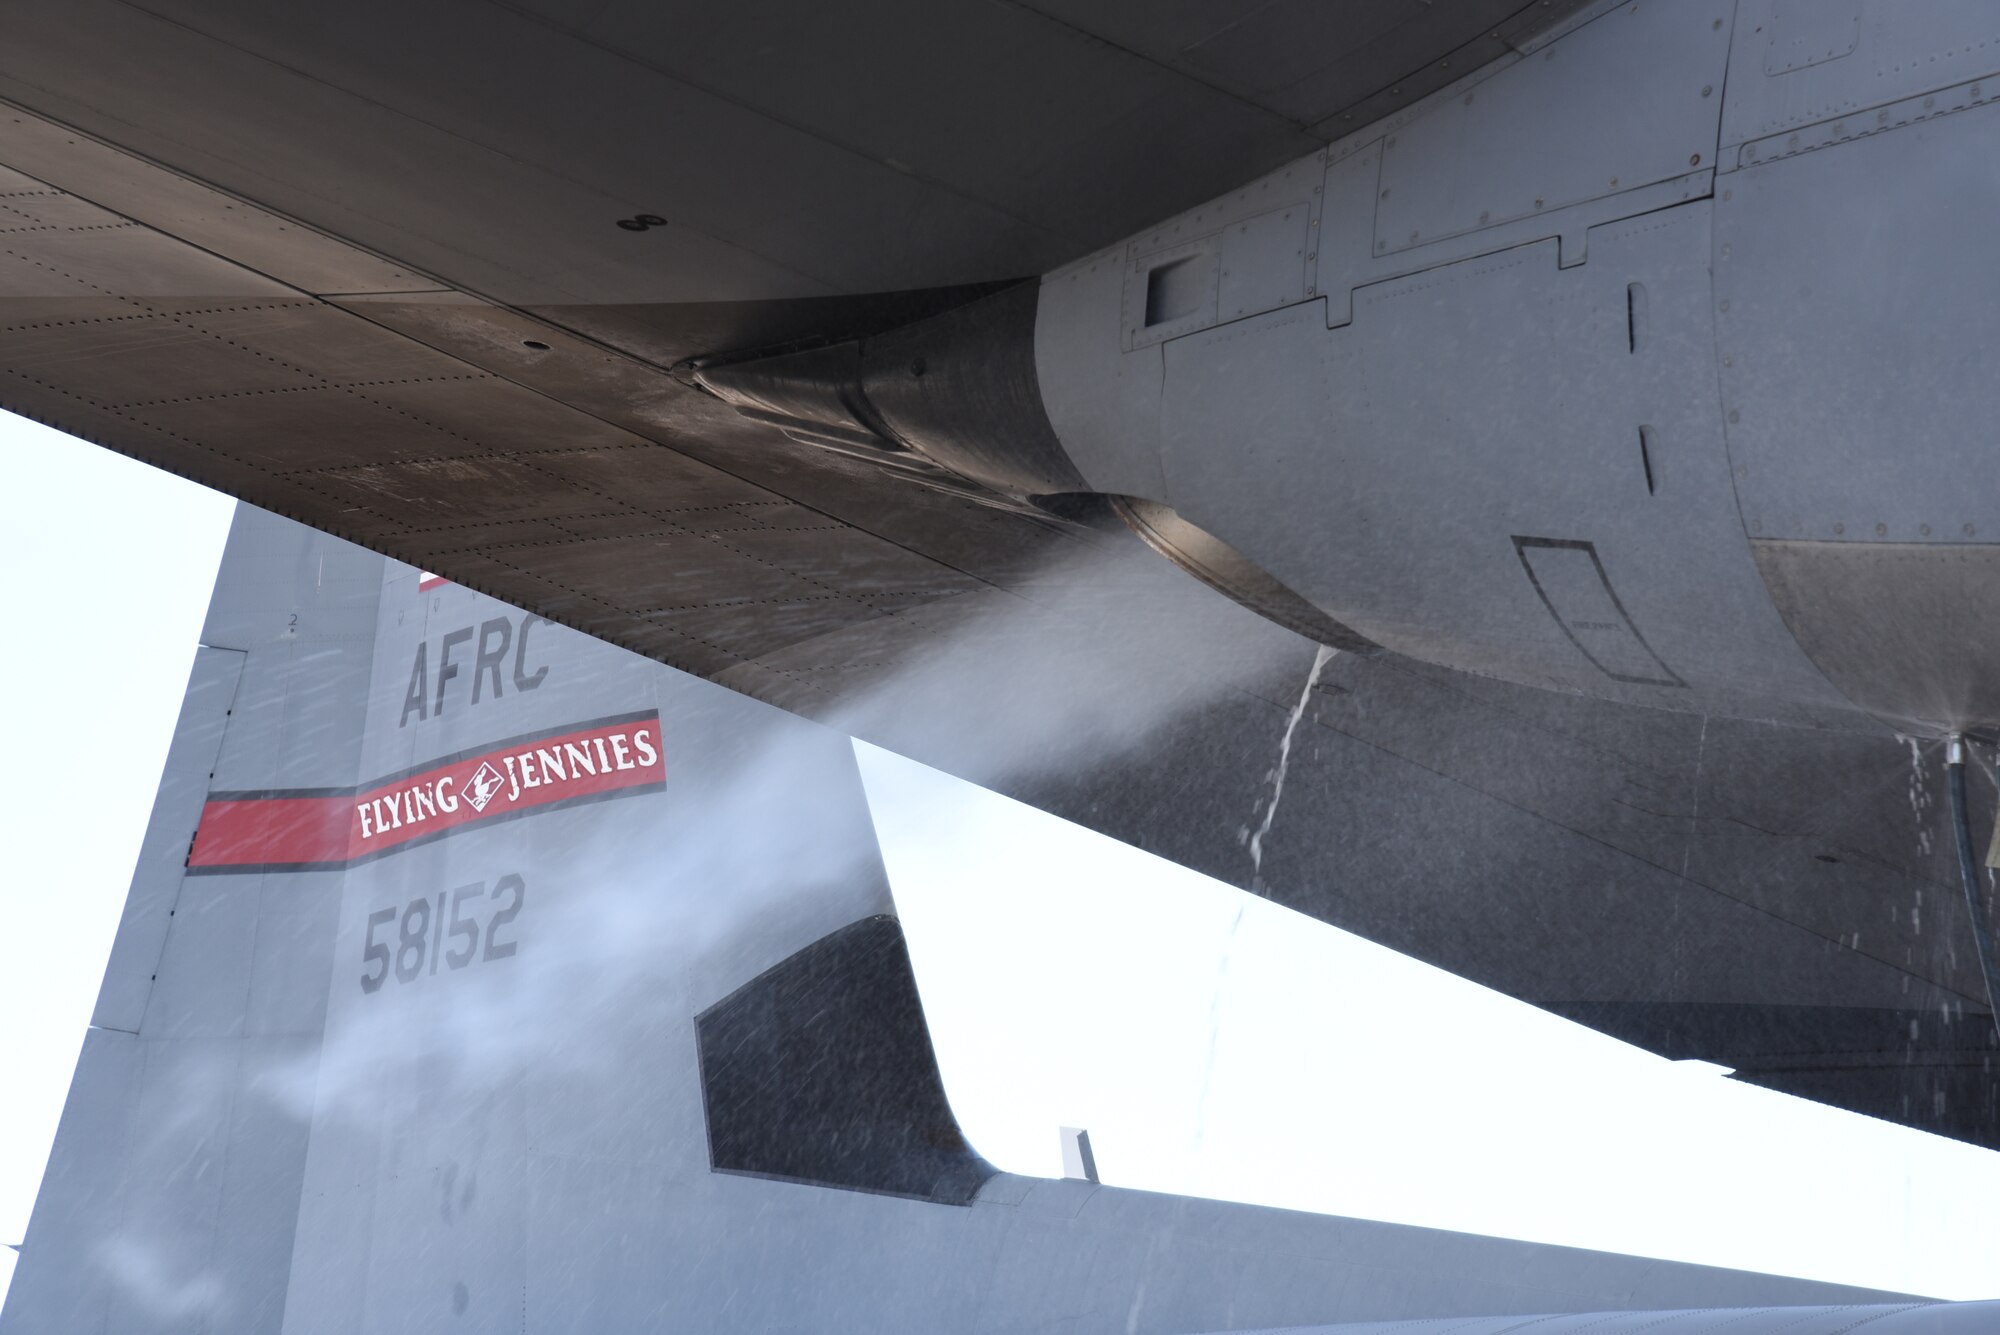 An 815th Airlift Squadron C-130J Super Hercules receives an Engine Compressor Wash before the aircraft goes for a "C" letter inspection in the Isochronal Dock at Keesler Air Force Base, Mississippi May 11, 2020. While completing the ECW, members of the 403rd Maintenance Squadron observe the water and mist that comes out of the engine compartment to ensure the engine is clean prior to inspection. These inspections or letter checks can range from "A" five days basic check, "B" 18 days and more in depth, to "C" 22 days which is the most intrusive inspection; but are necessary to keep the aircraft maintained. (U.S. Air Force photo by Jessica L. Kendziorek)